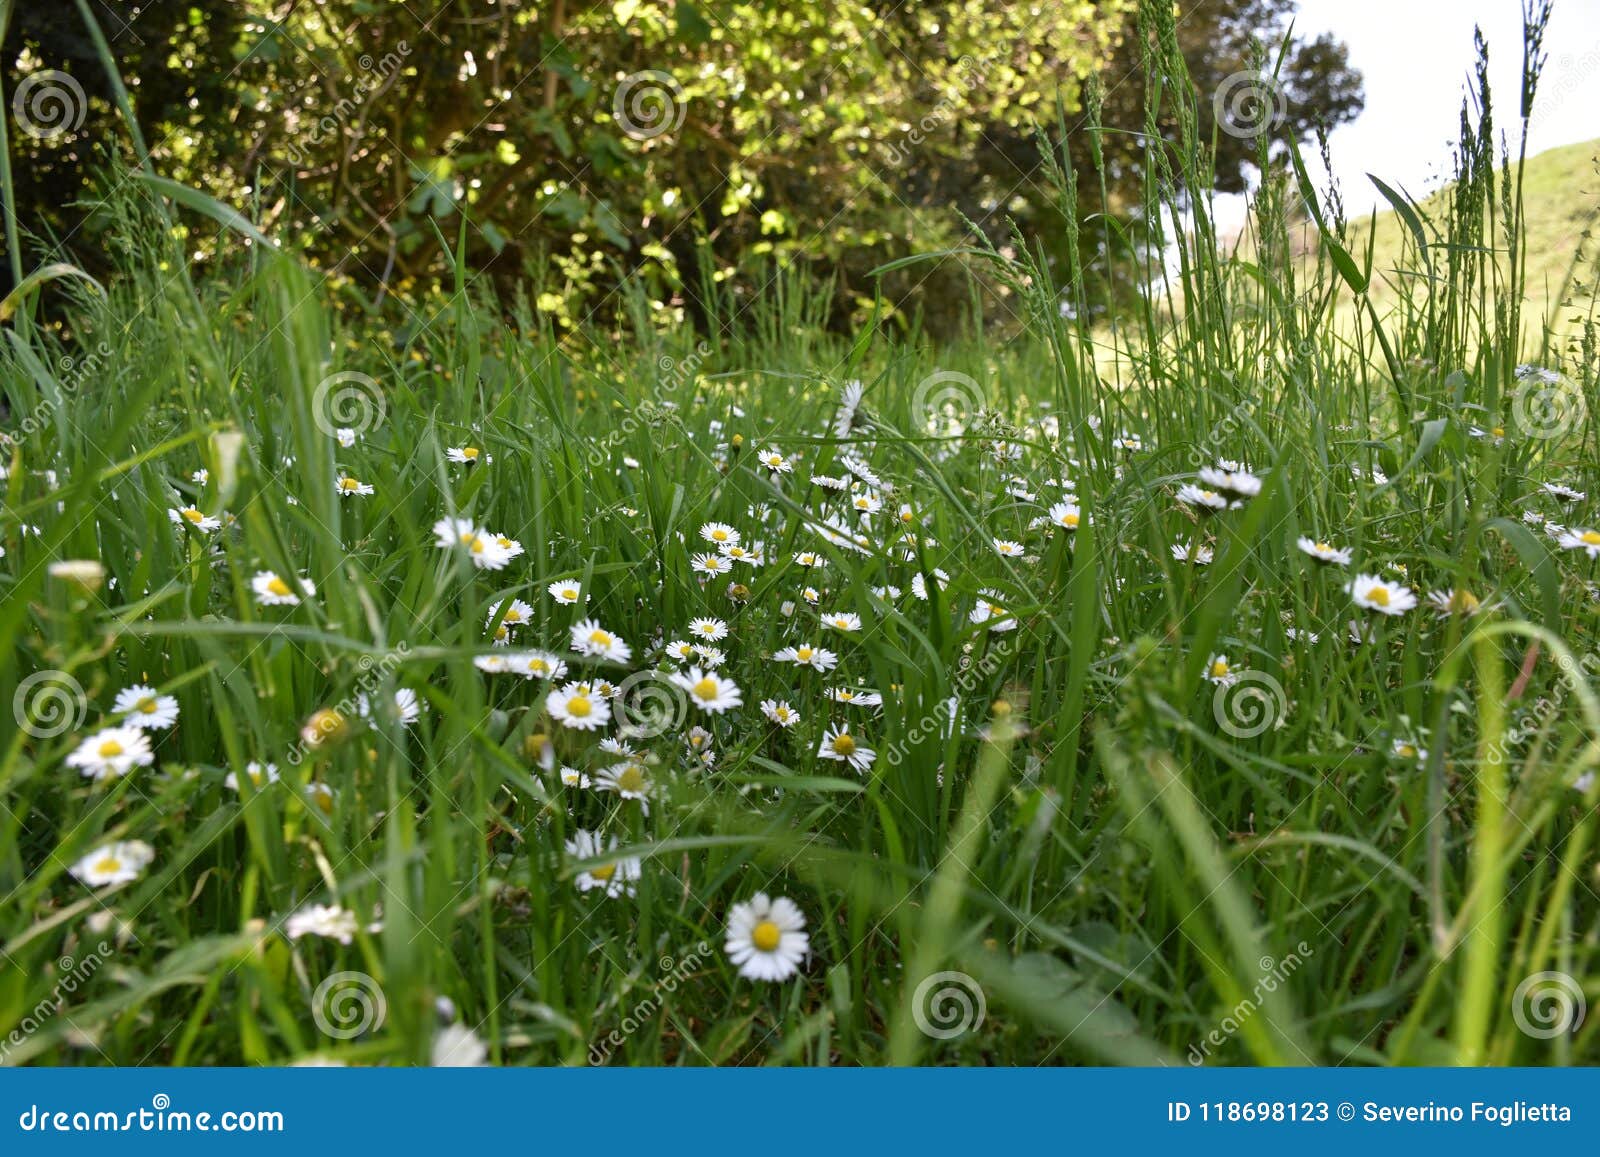 view of daisies on background of green leaves